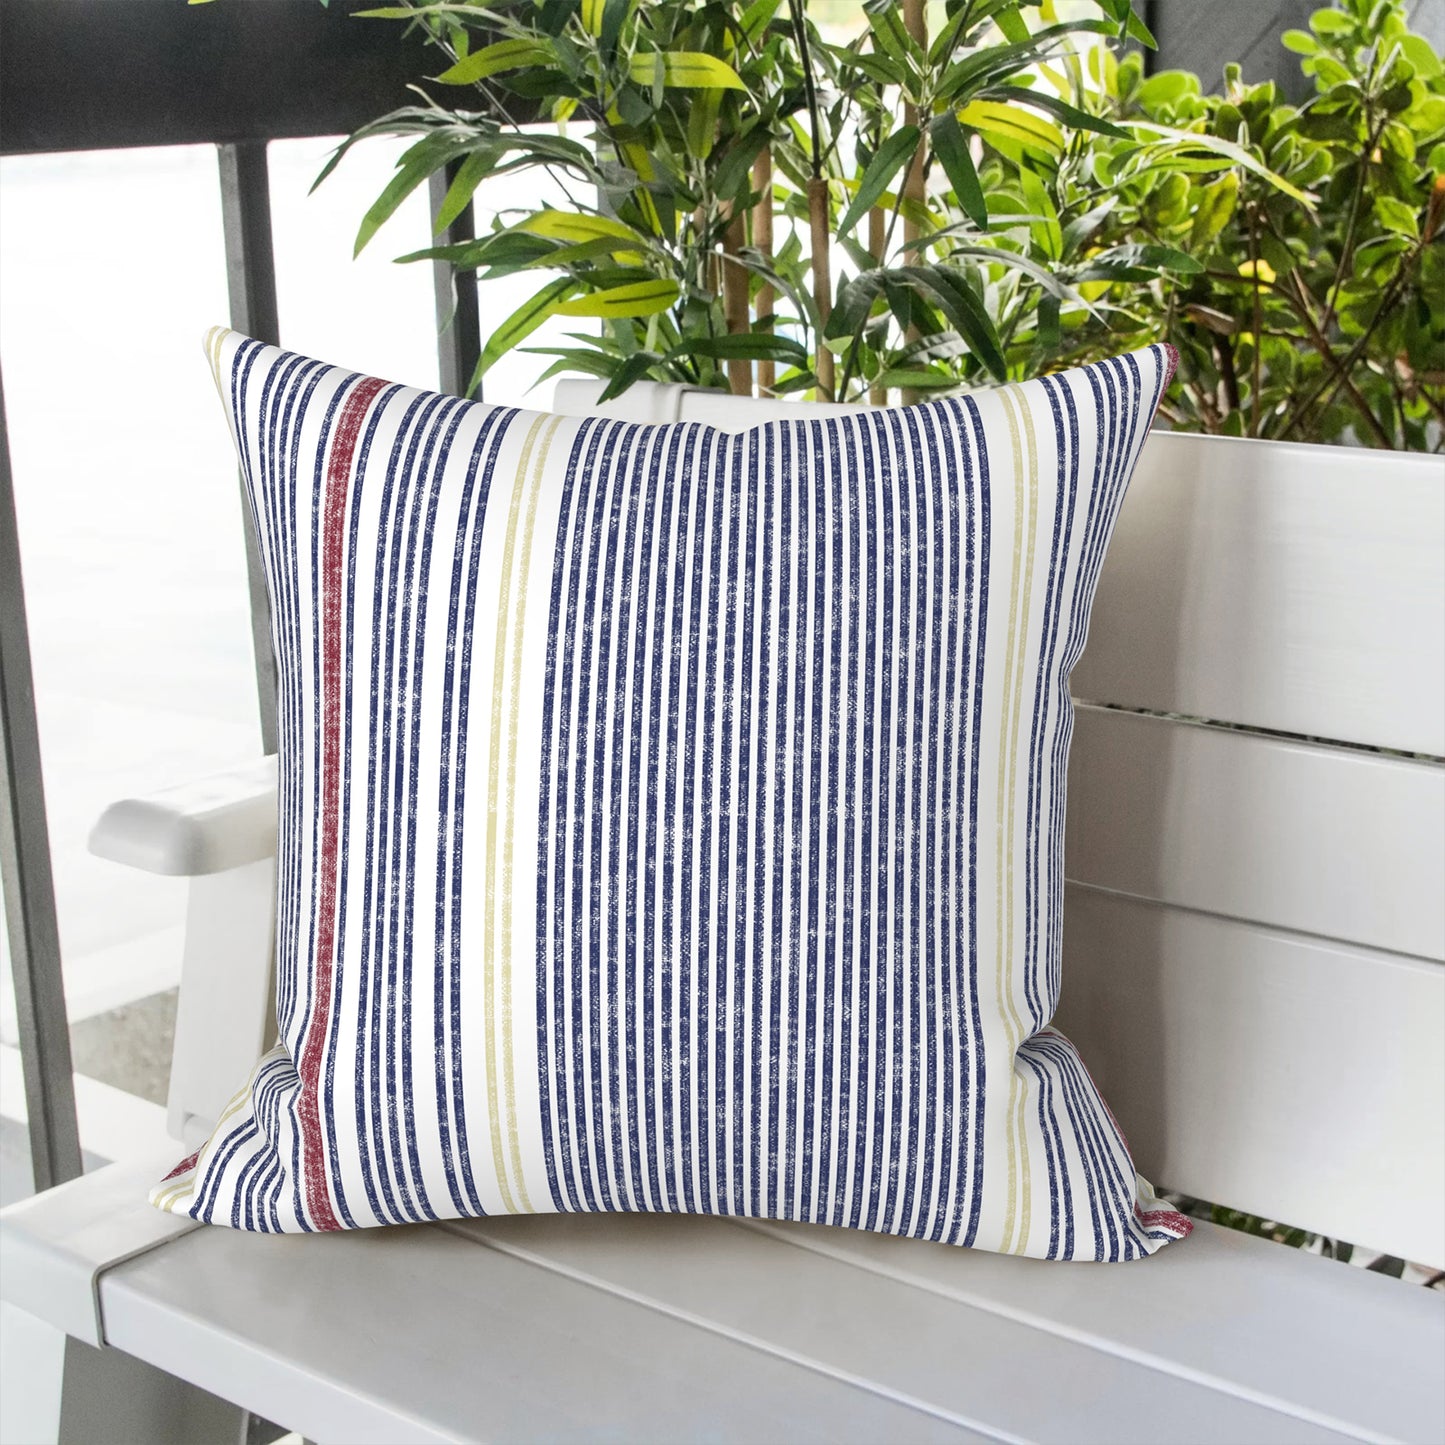 Melody Elephant Outdoor Throw Pillow Covers Pack of 2, Decorative Water Repellent Square Pillow Cases 18x18 Inch, Patio Pillowcases for Home Patio Furniture Use, Stripe Denim Blue